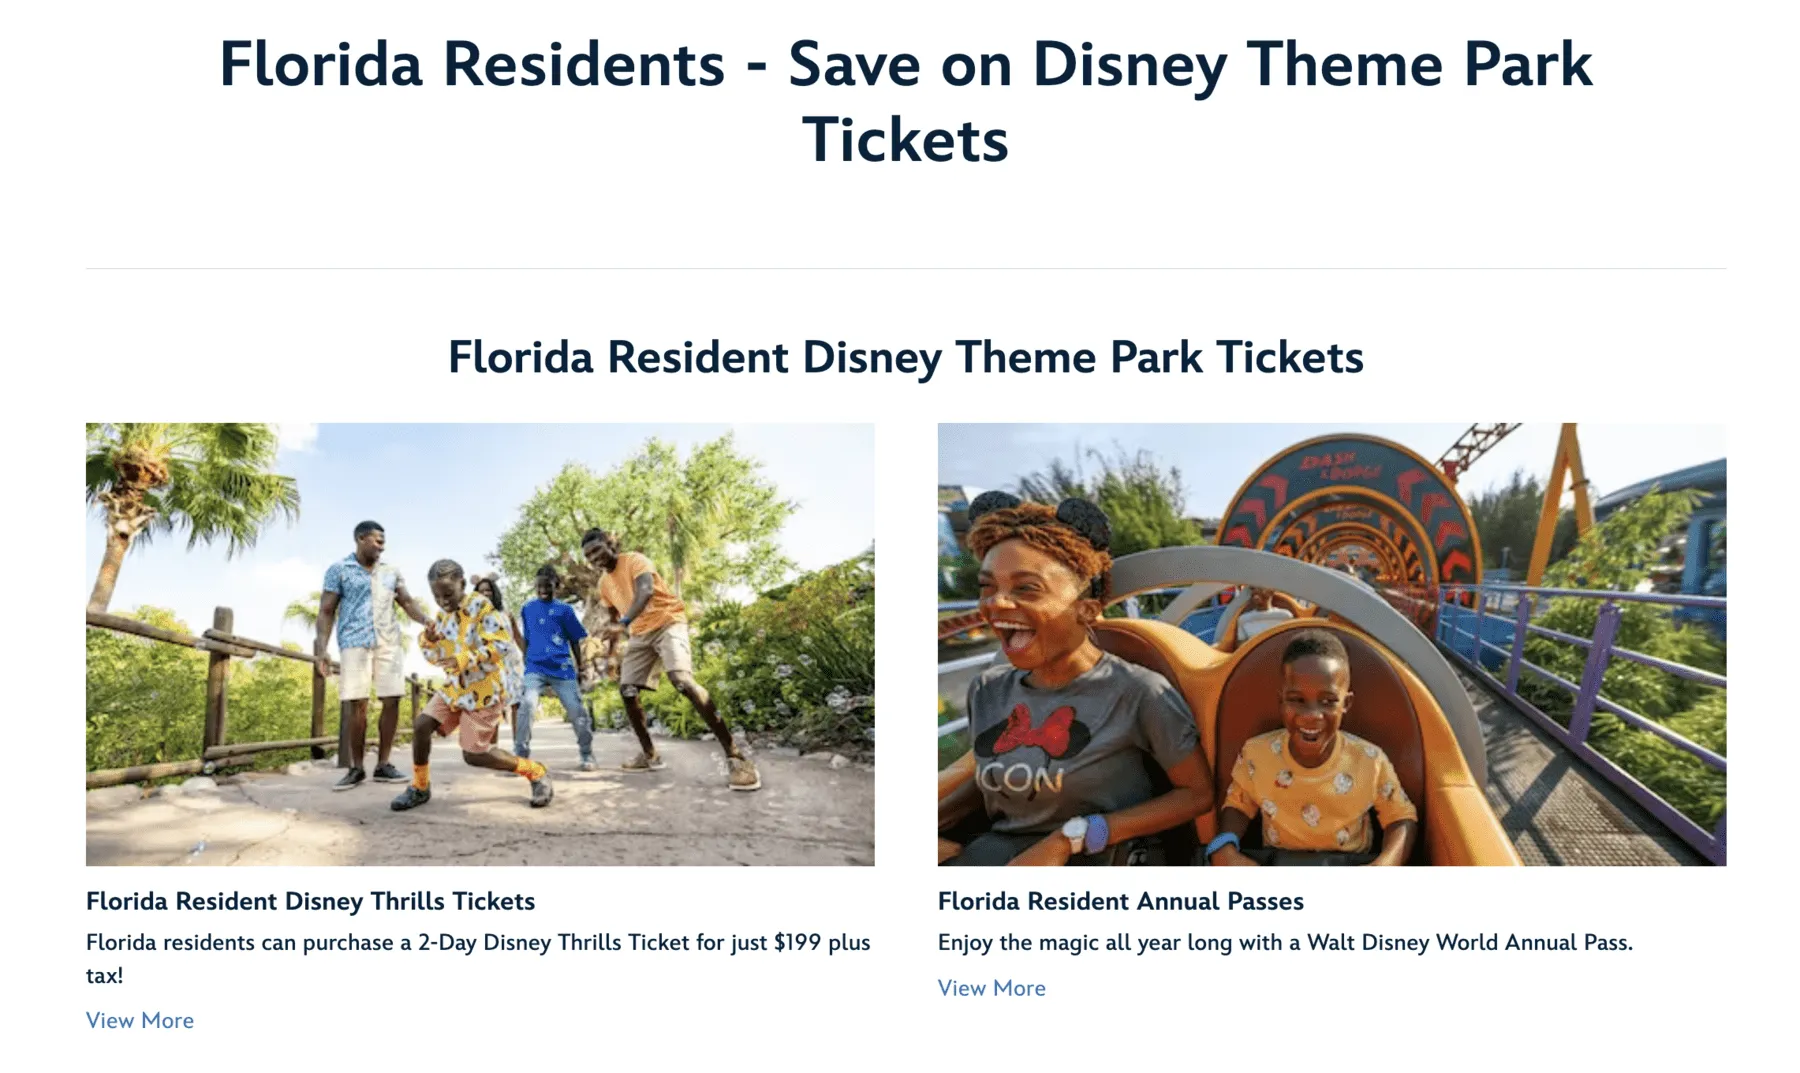 Disney Theme Park tickets offer for locals